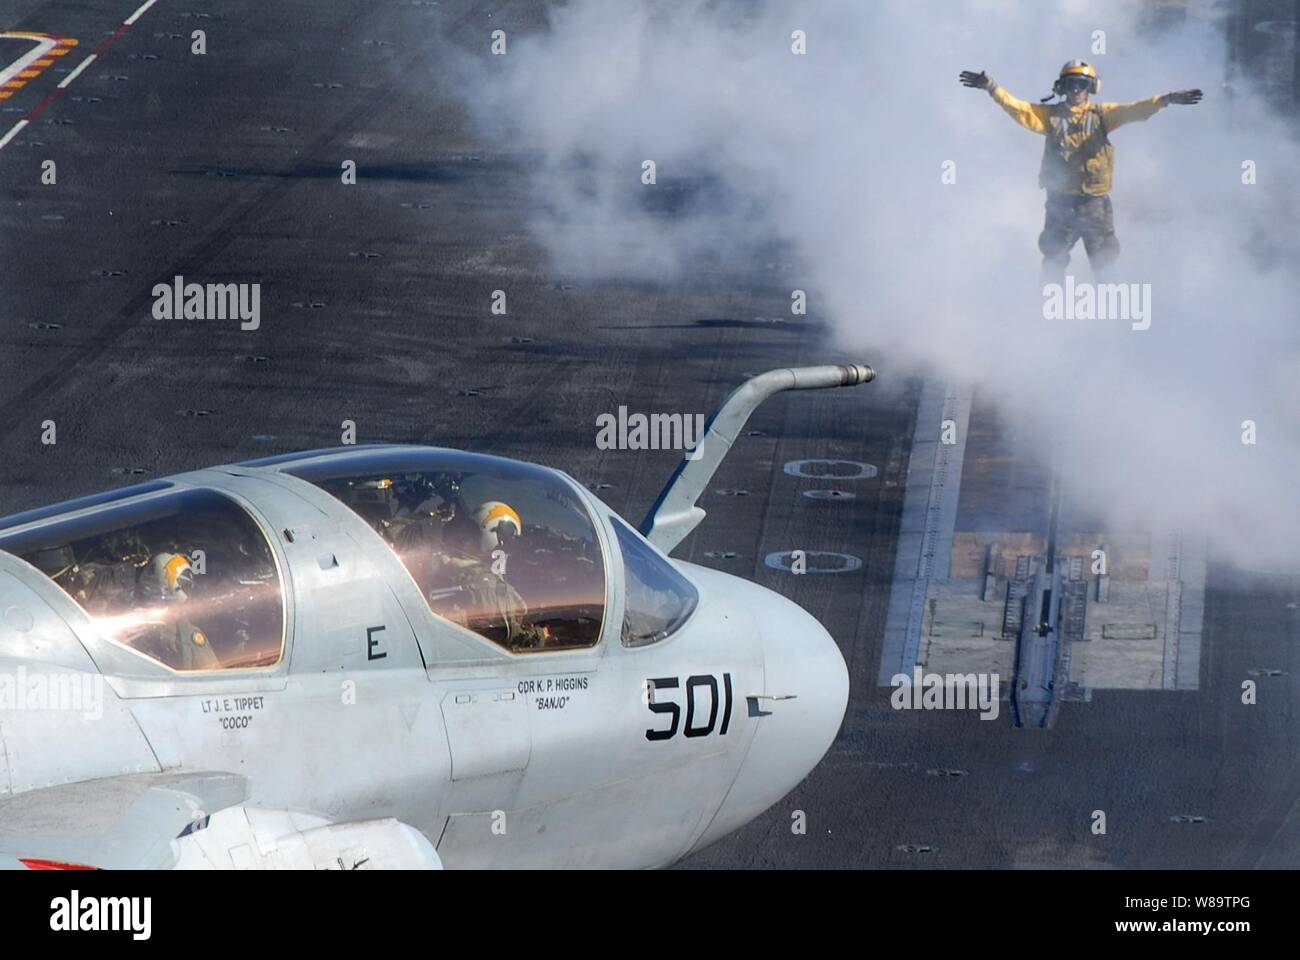 A U.S. Navy flight deck crewman directs an EA-6B Prowler aircraft onto the steam catapult for launch from the aircraft carrier USS John C. Stennis (CVN 74) as the ship steams in the Pacific Ocean on Jan. 26, 2007.  The all-weather Prowler provides protection for strike aircraft, ground troops and ships by jamming enemy radar, electronic data links, communications and obtains tactical electronic intelligence within the combat area.  Stennis is under way in the Pacific en route to the U.S. Central Command area of operations. Stock Photo